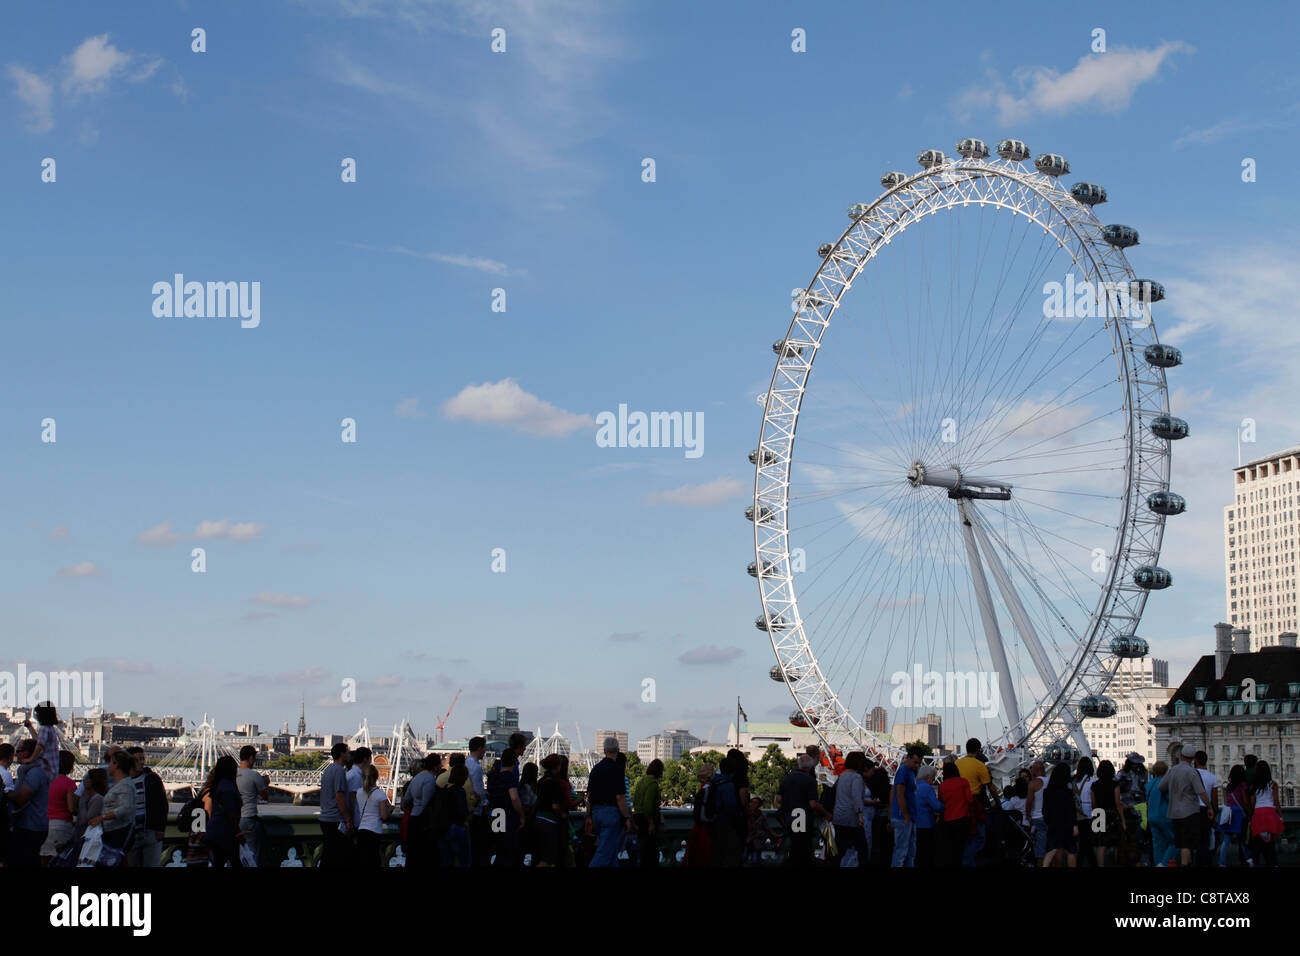 London Eye and crowd in London Stock Photo